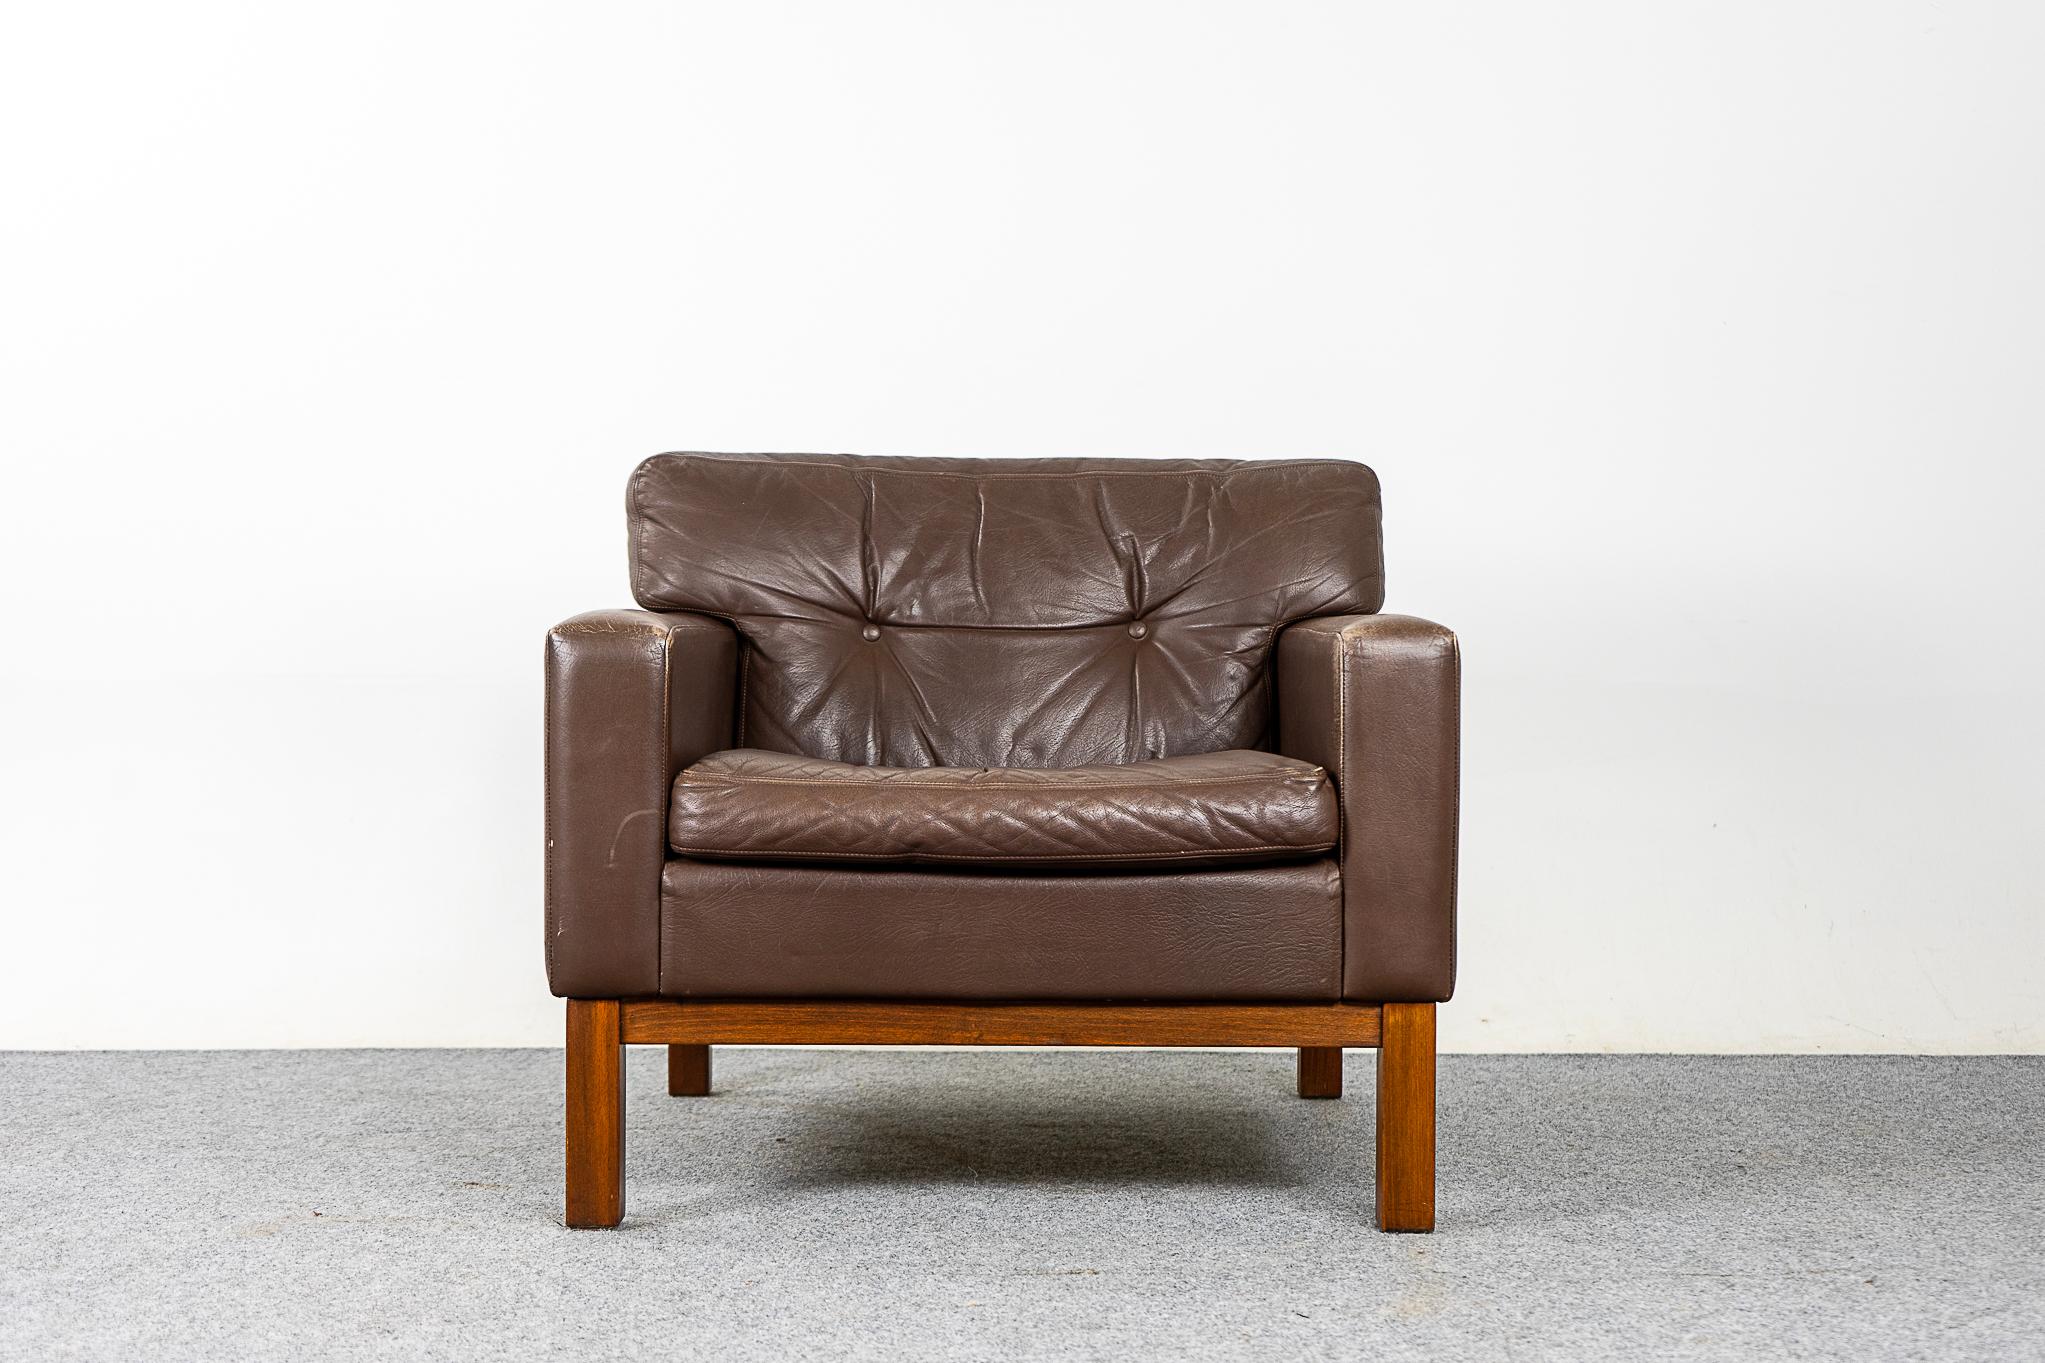 Leather and teak Danish lounge chair, circa 1960's. Simple and comfy lounge chair, original brown leather upholstery, back cushion is tufted. Solid teak base.

Please inquire for international and remote shipping rates.